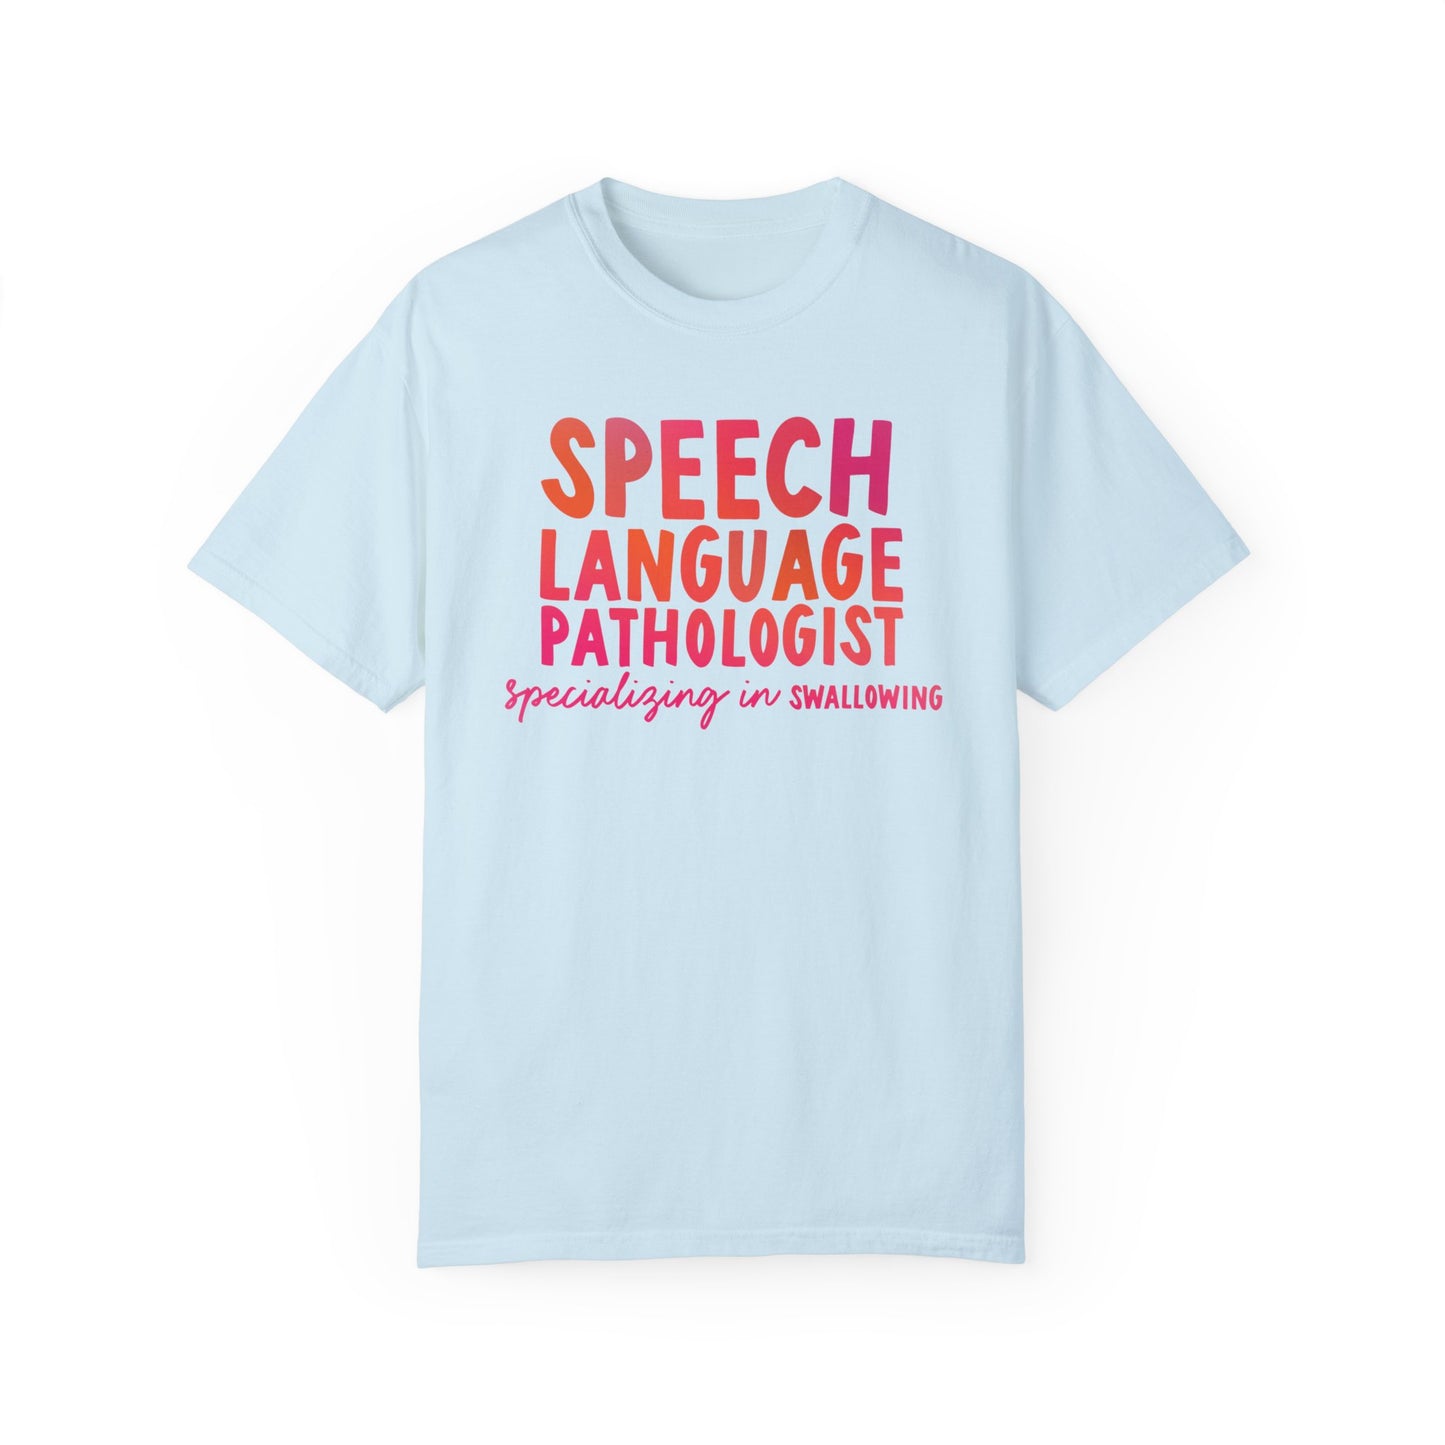 Speech Language Pathologist Specializing in Swallowing Tee